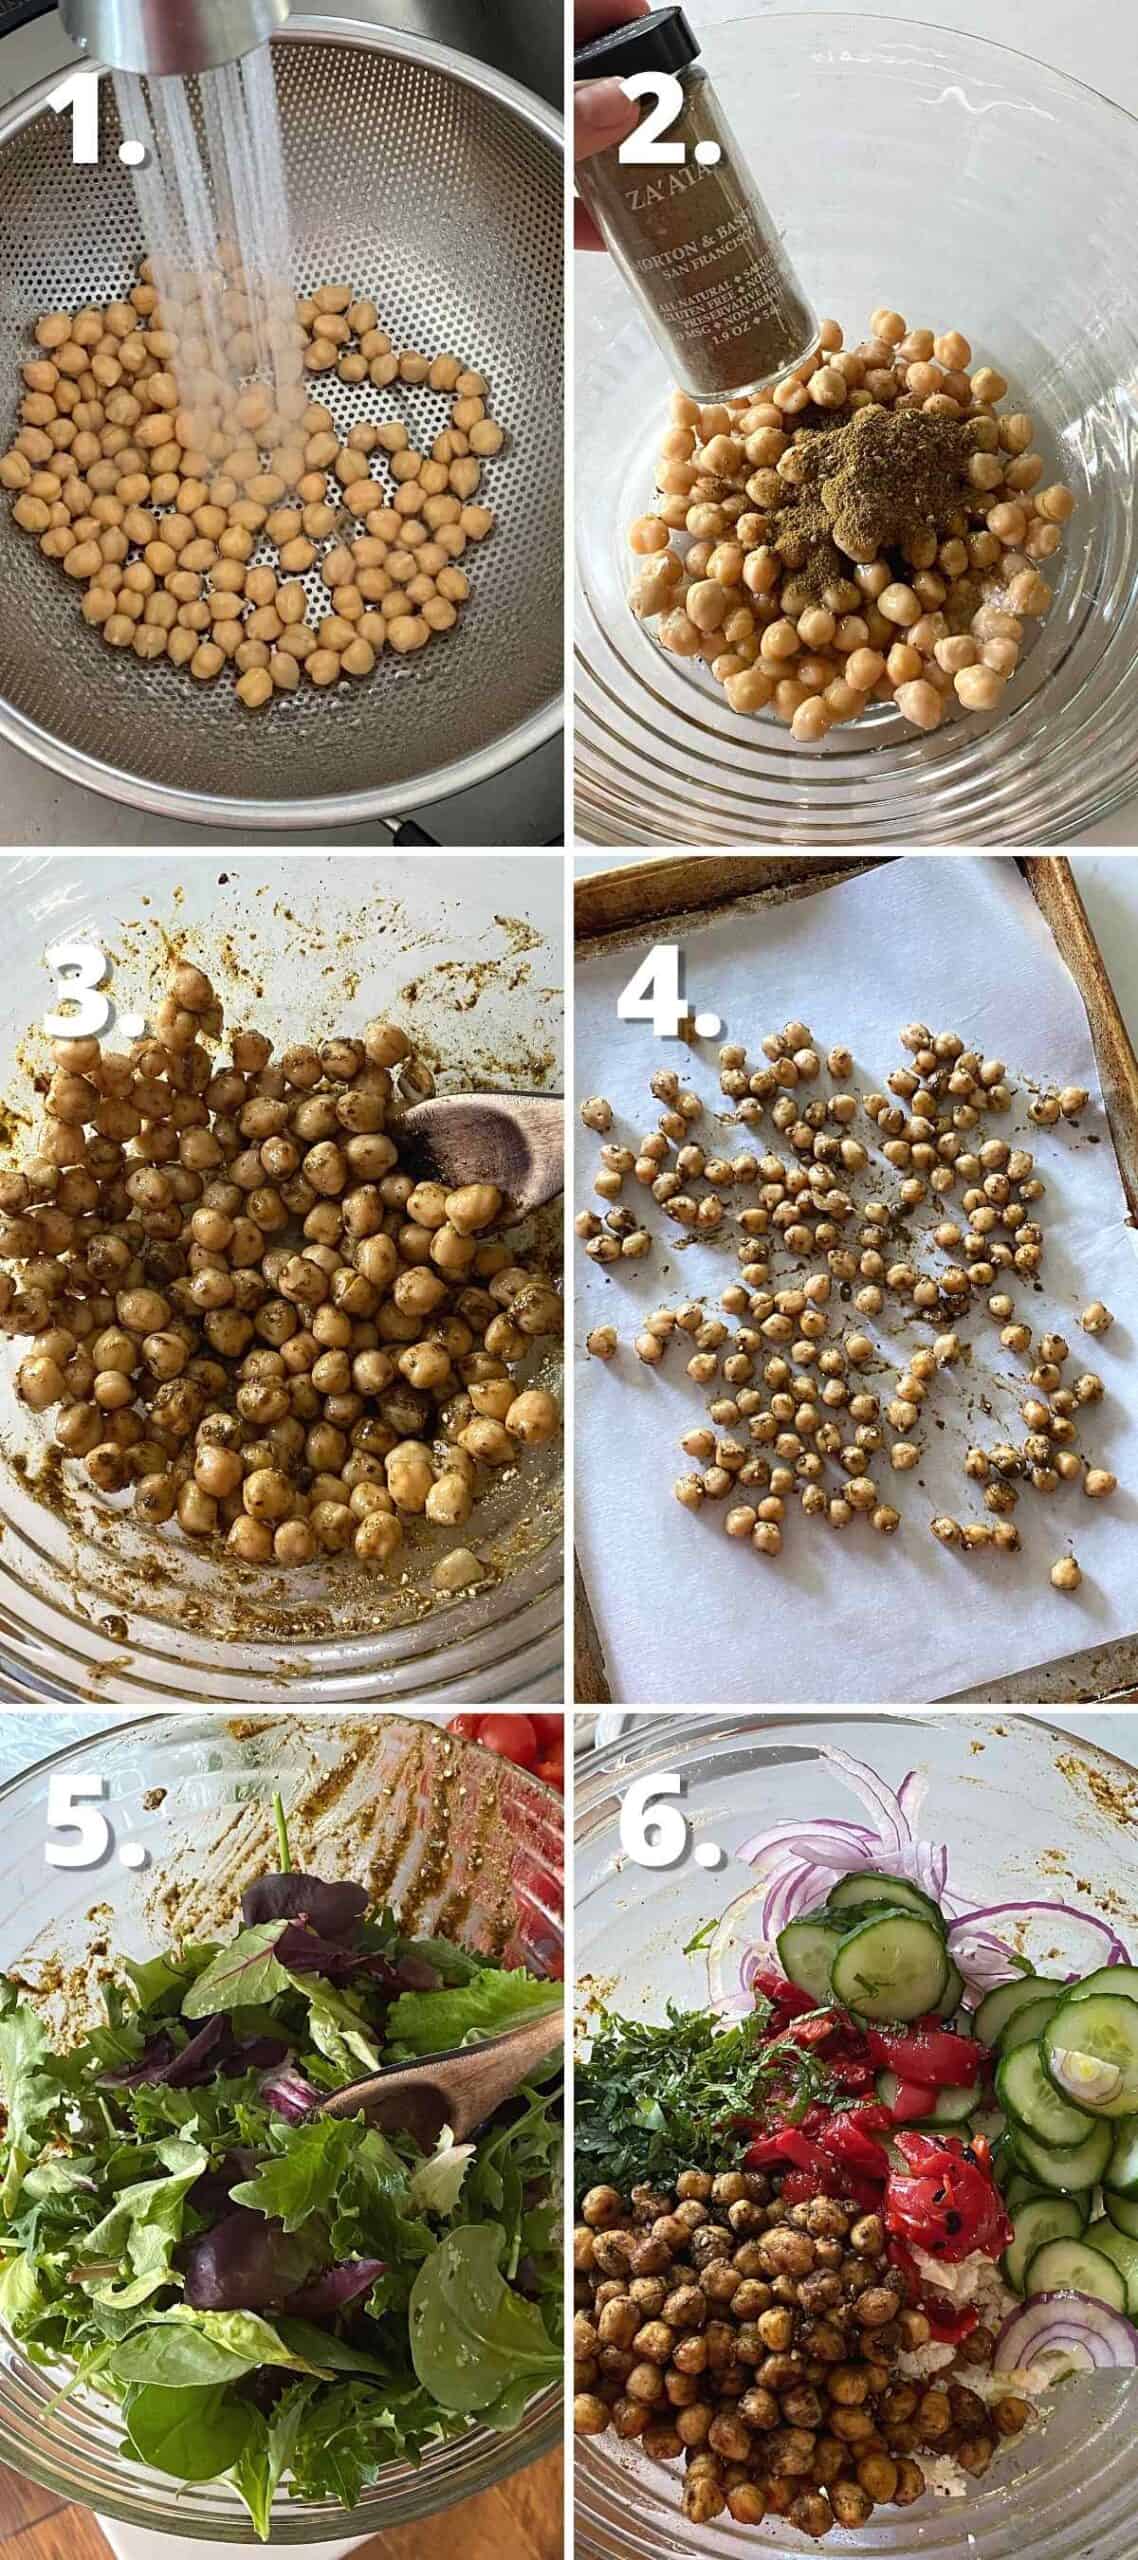 Numbered process collage showing how to roast za'atar chickpeas and toss salad ingredients in a bowl.